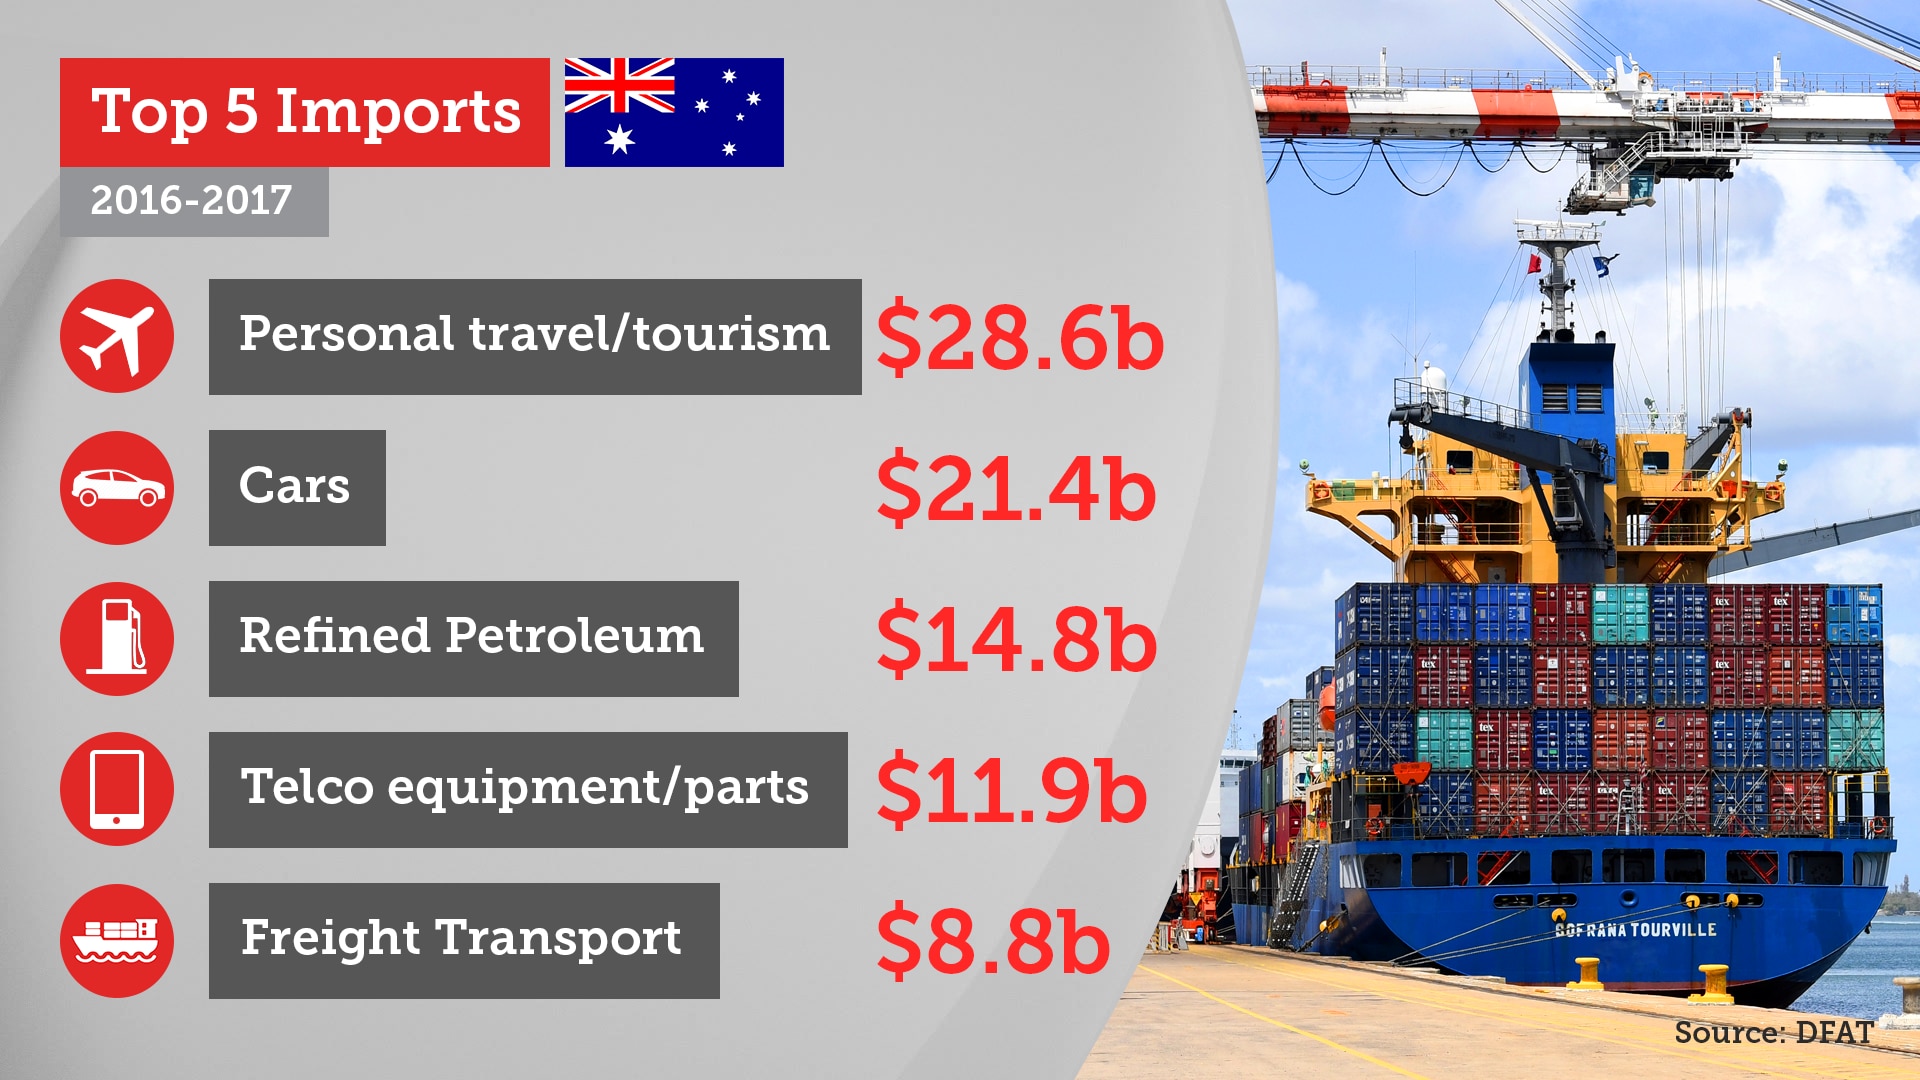 Australia's trade explained: Top imports, exports and trading partners